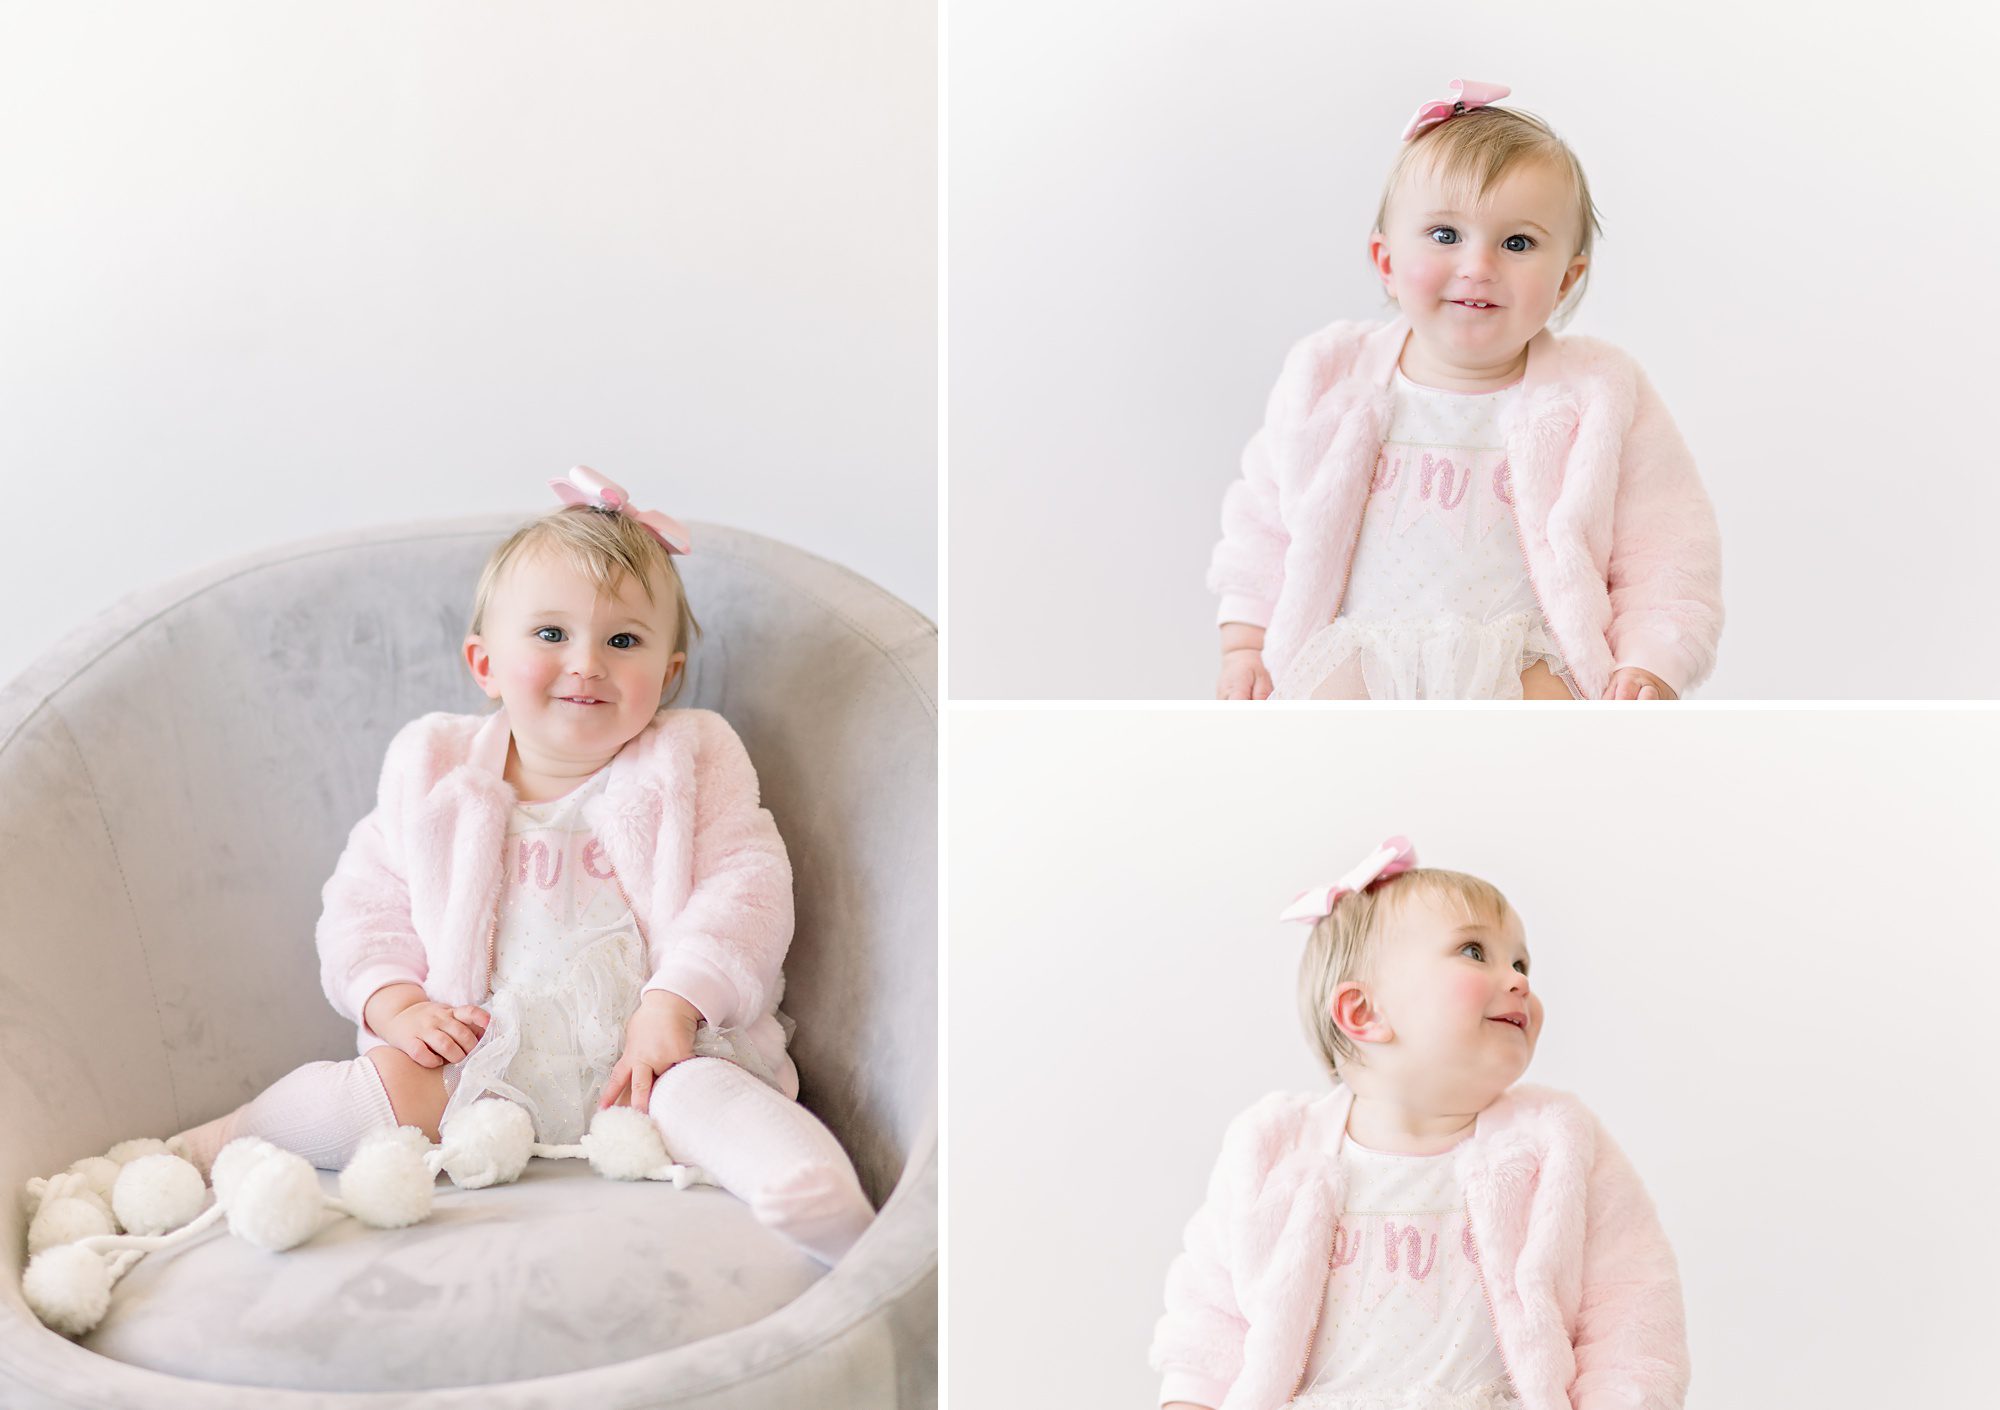 A sweet blonde baby girl gets 1st birthday photos done in a bright white studio, including portraits and a cake smash.